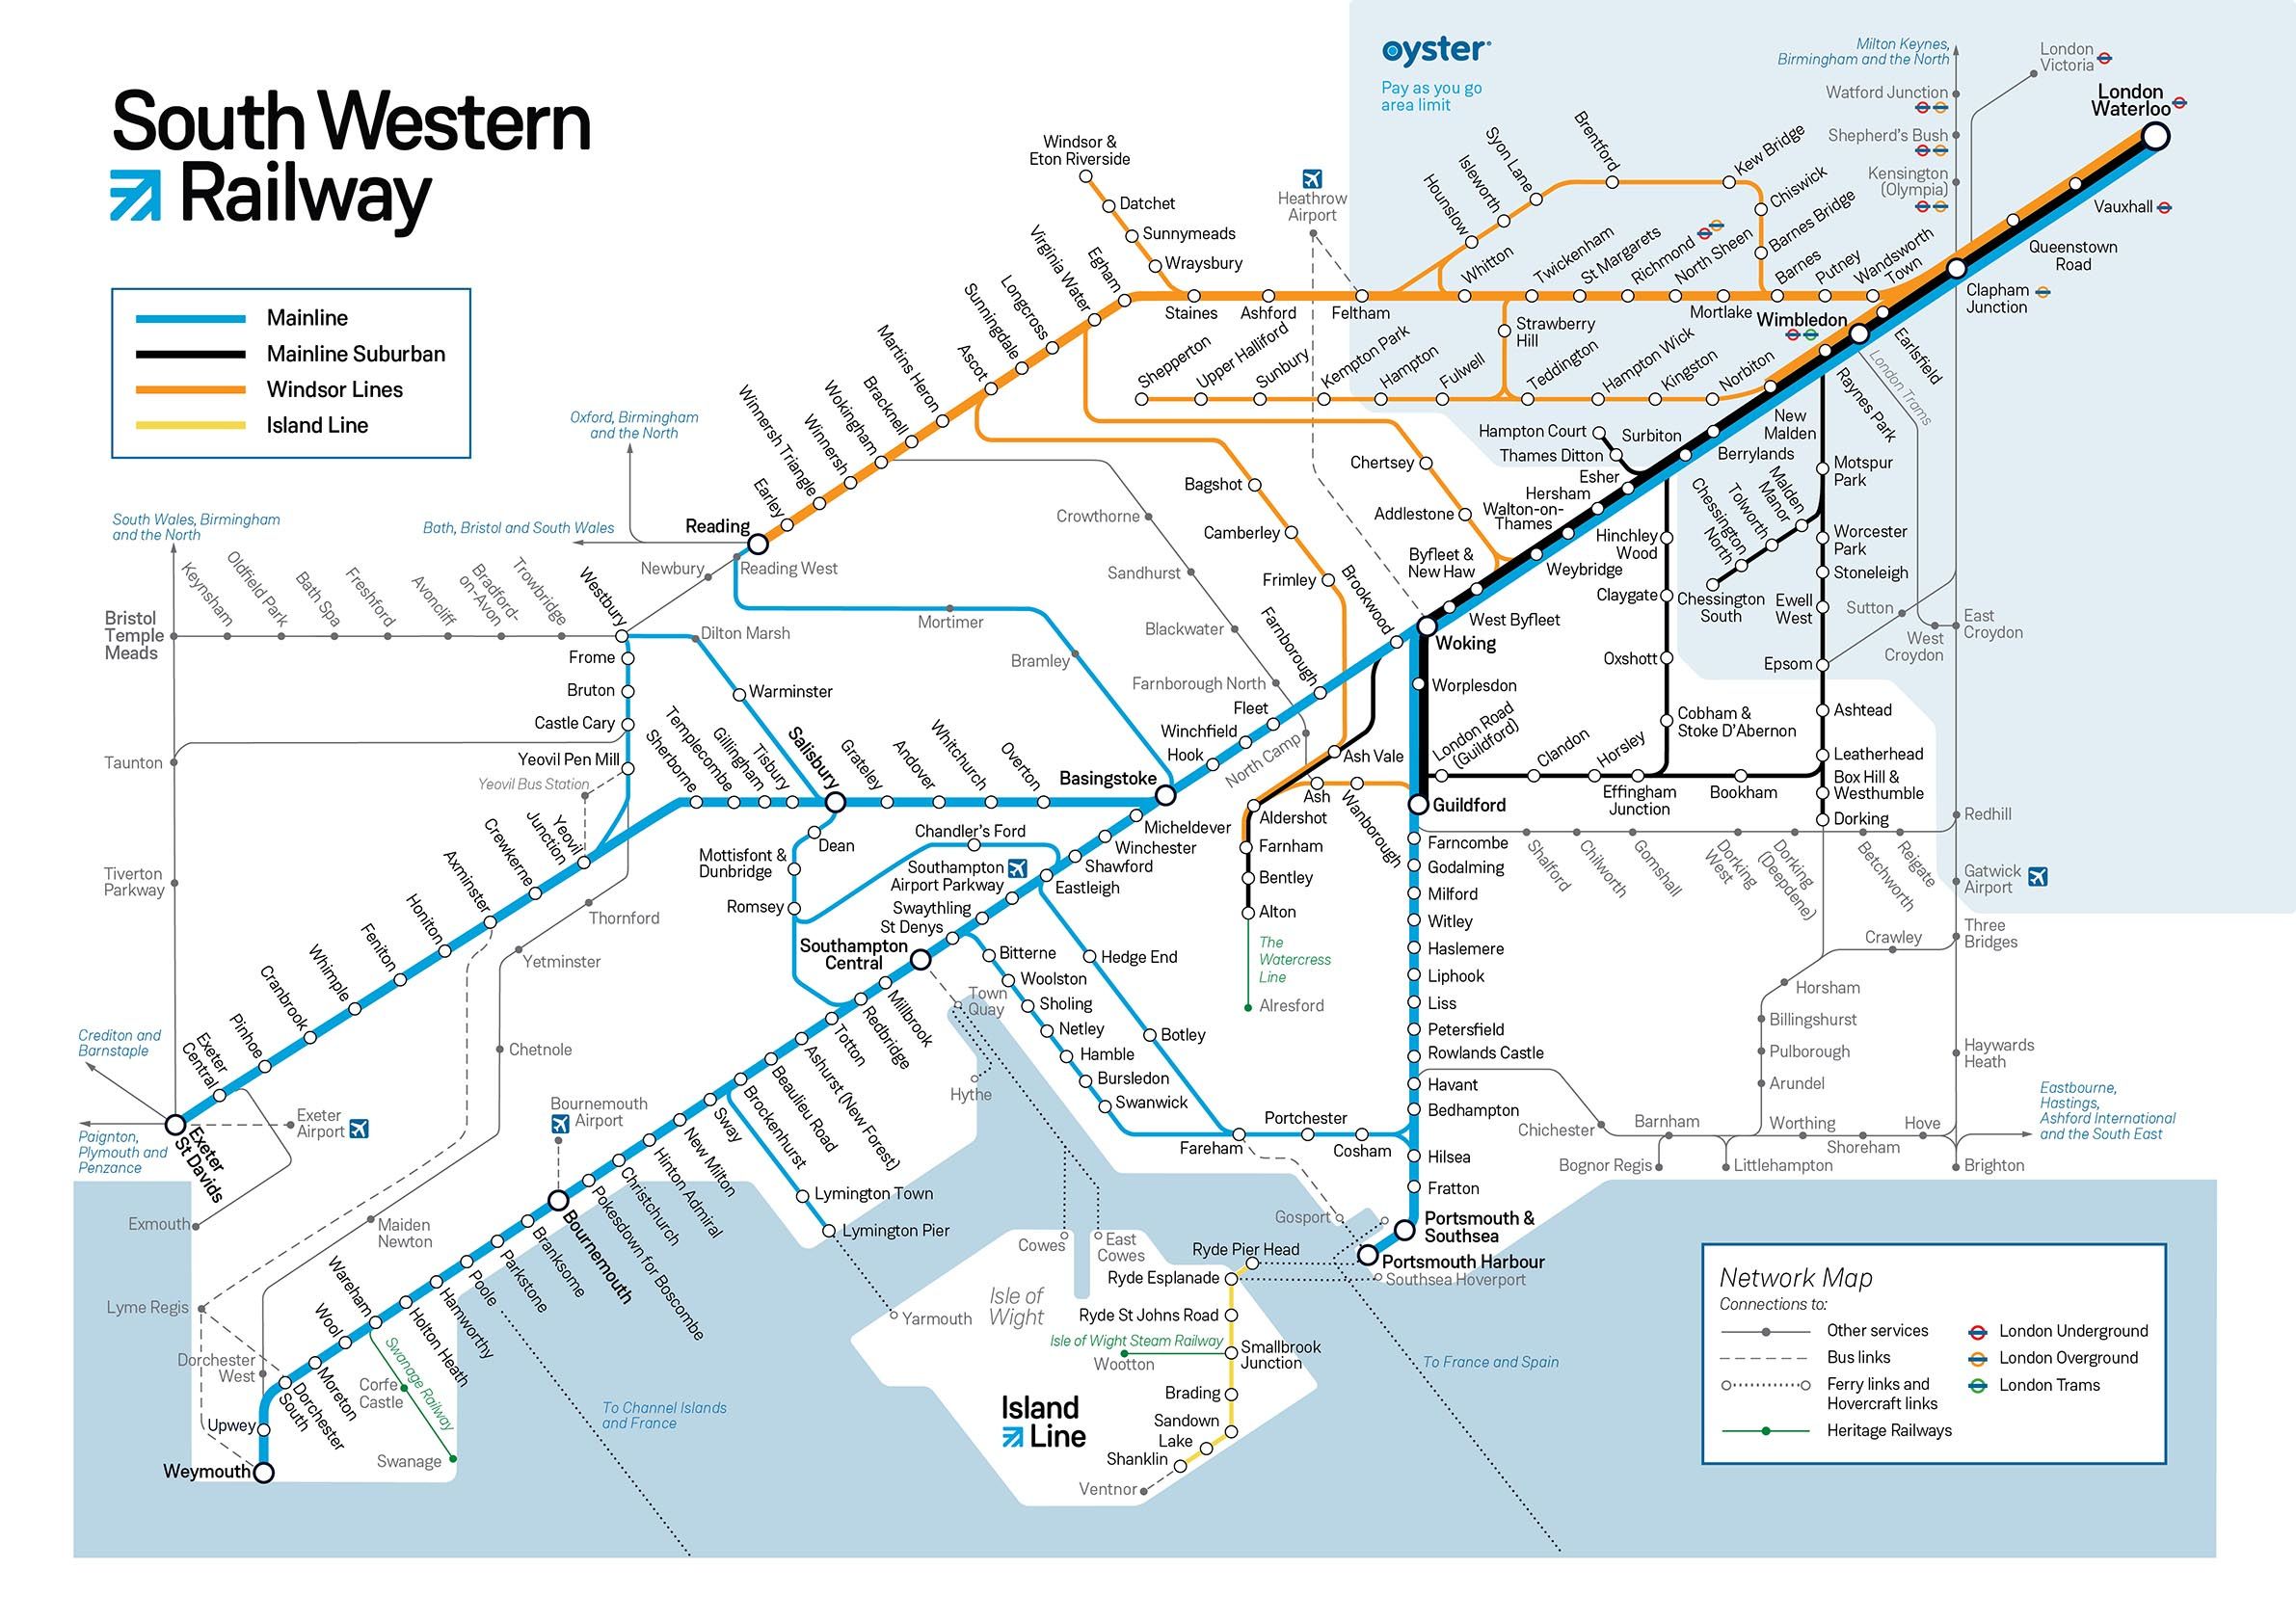 Map of the South Western Railway network with the performance figures lines